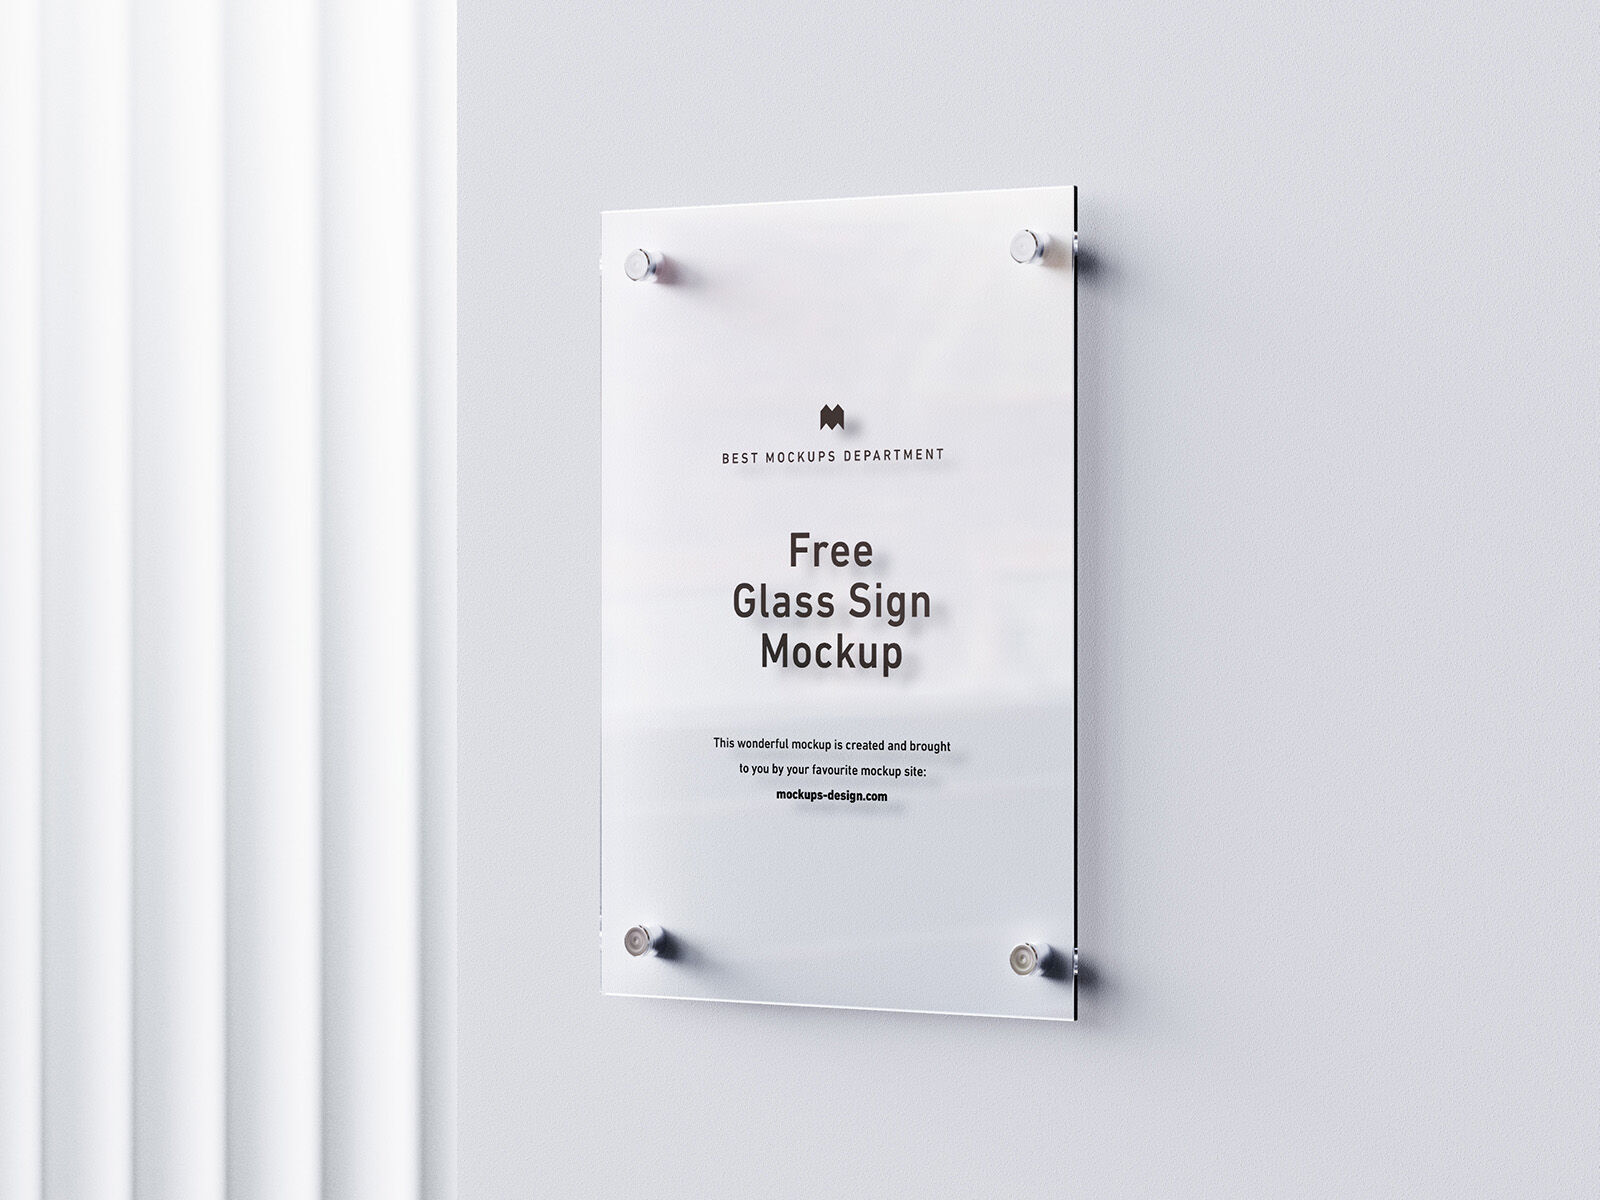 3 Mockups of Rectangular, Glass Signage Hung on the Wall in Different Angles FREE PSD